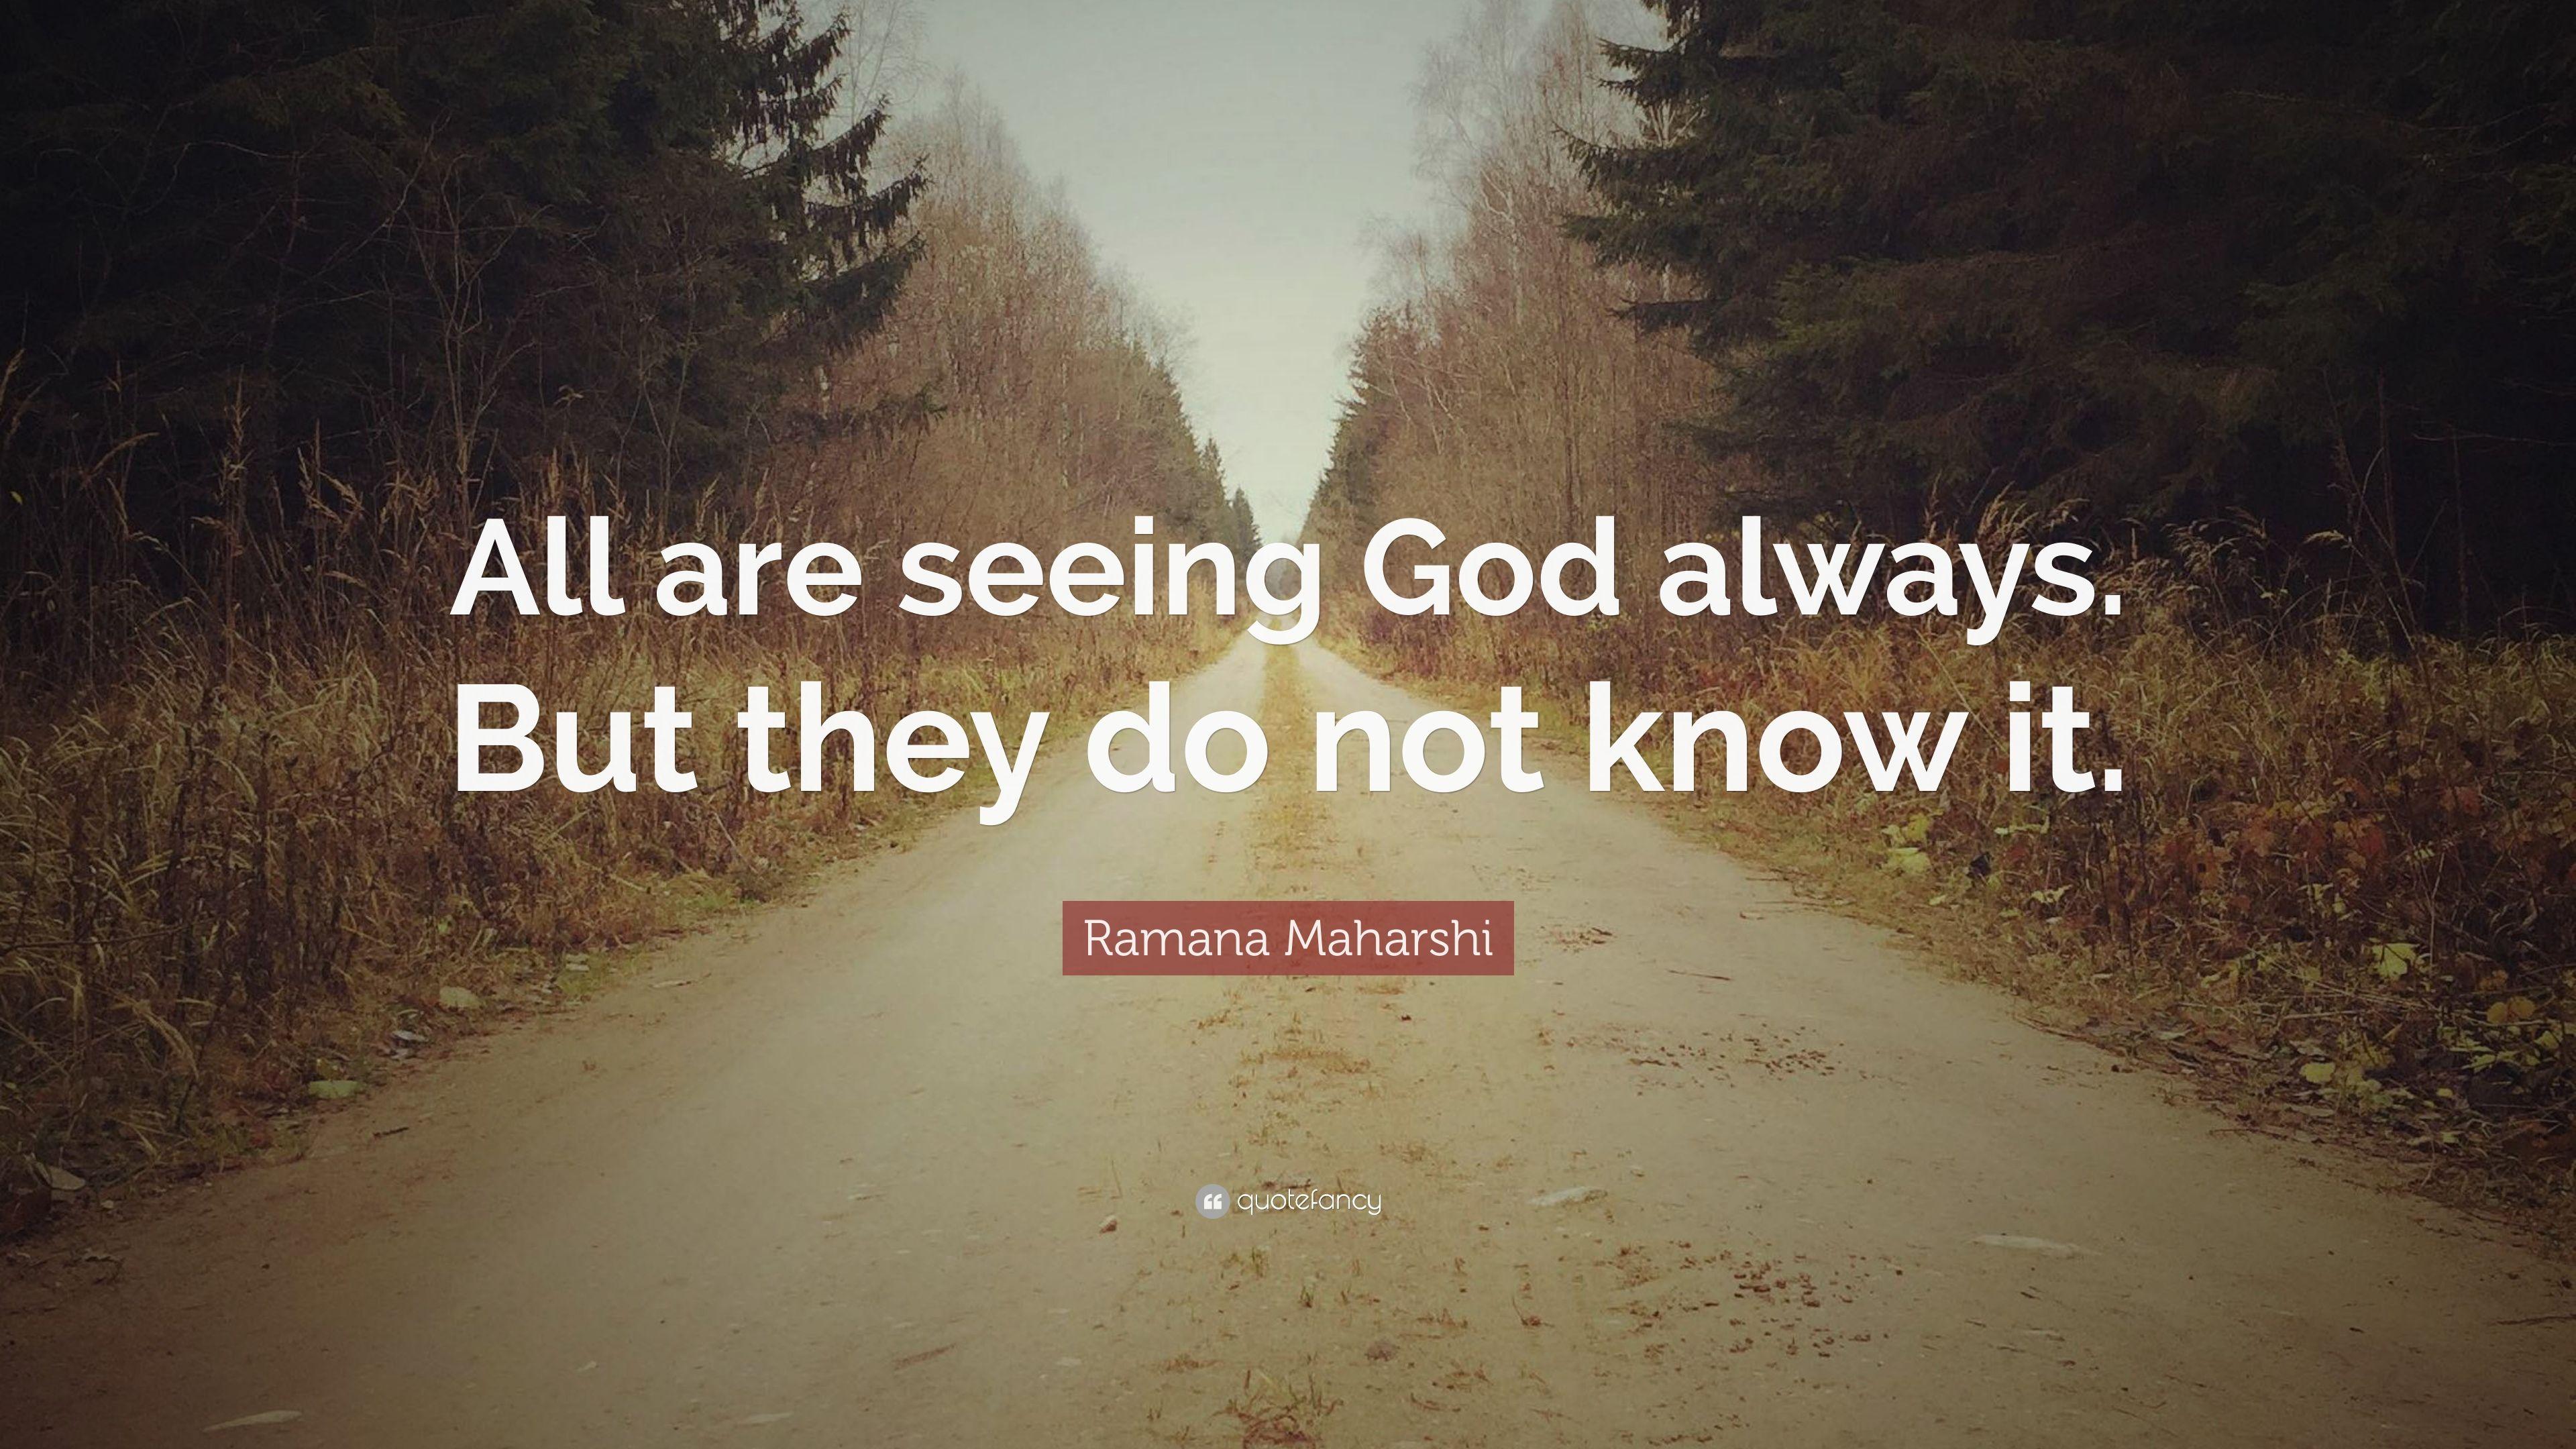 Ramana Maharshi Quote: “All are seeing God always. But they do not